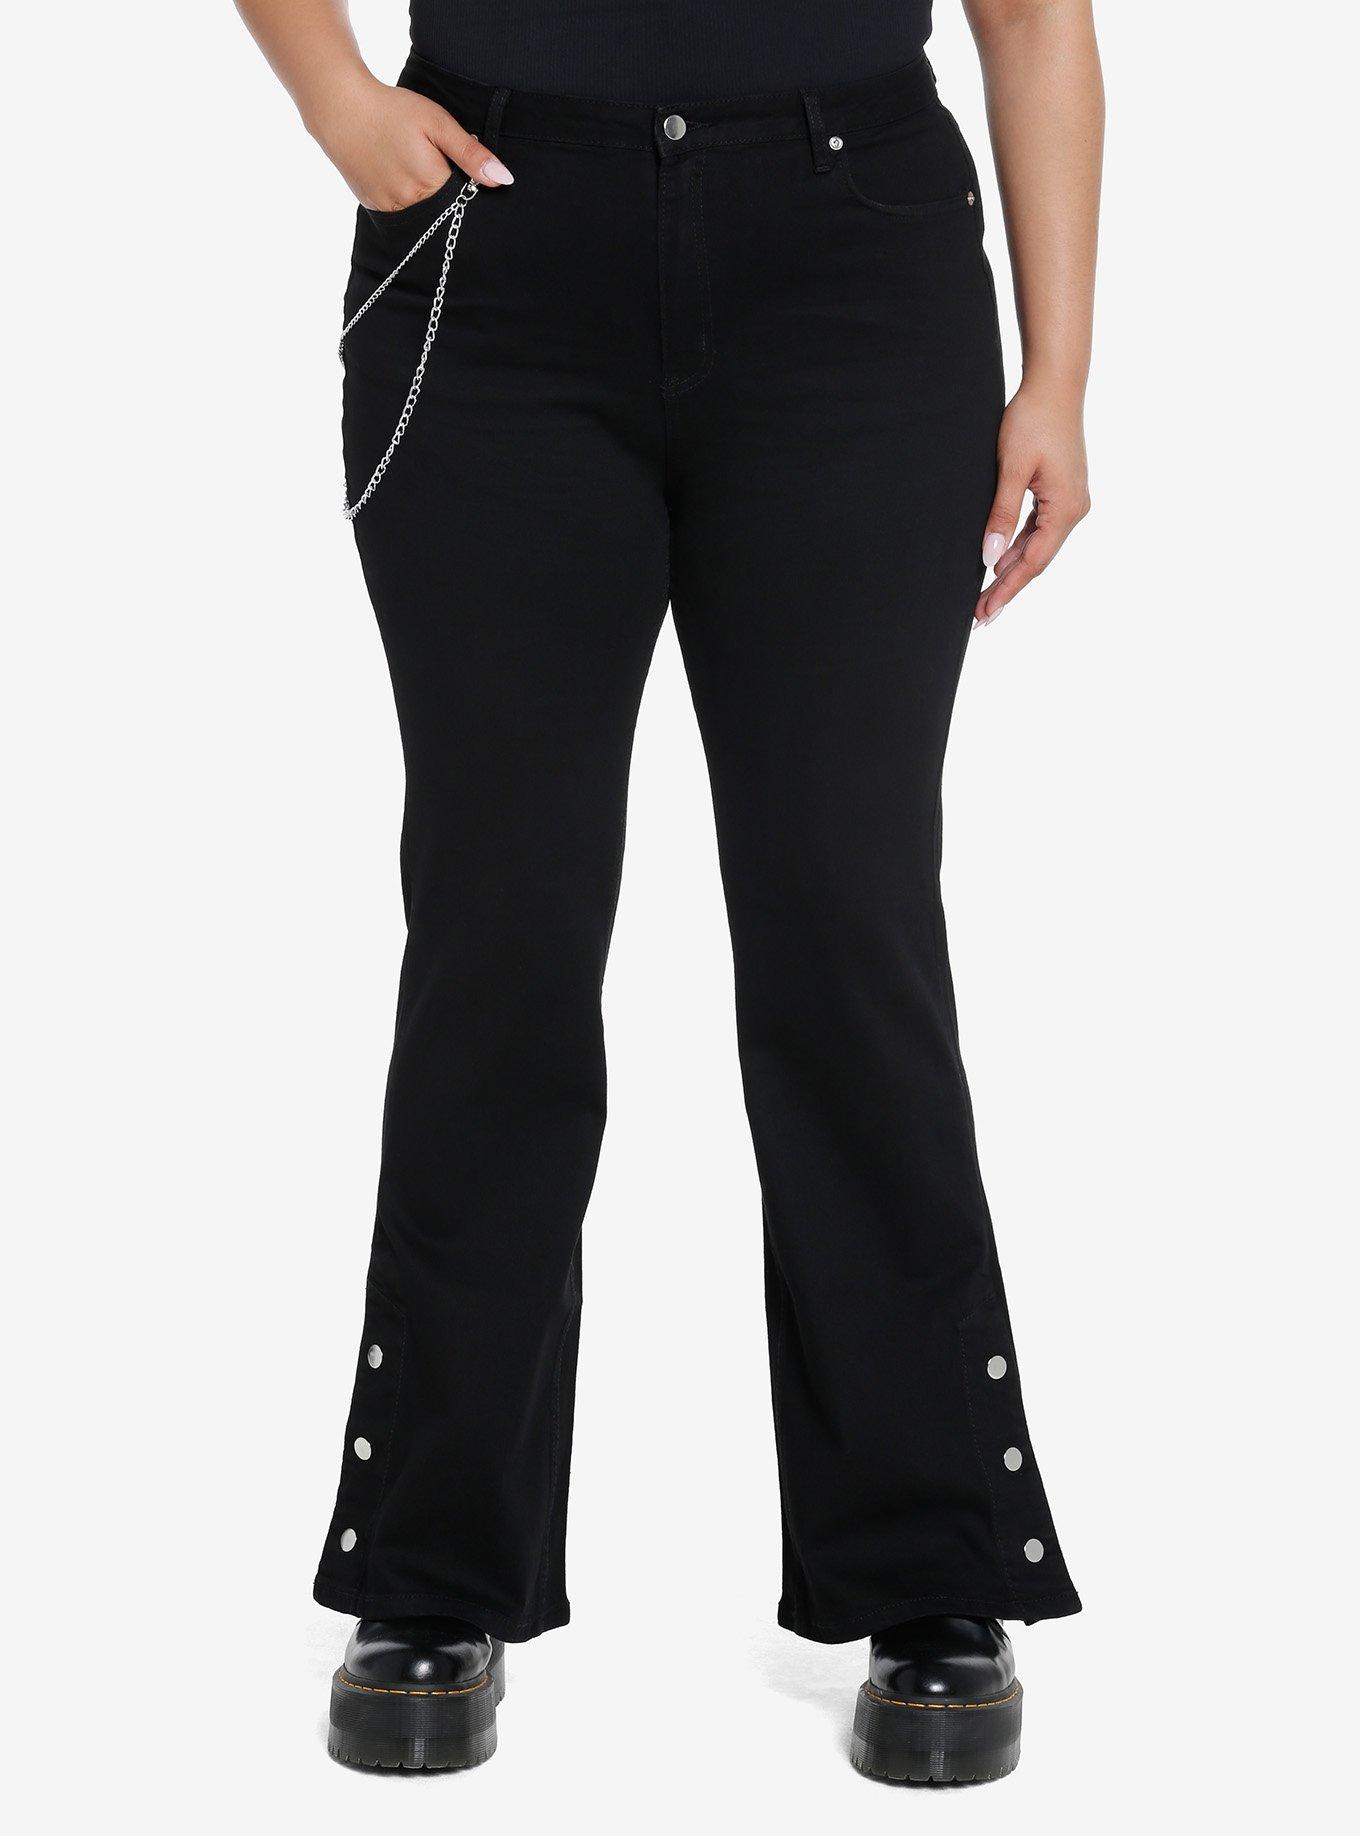 Prince Cropped Flare Pant - Black